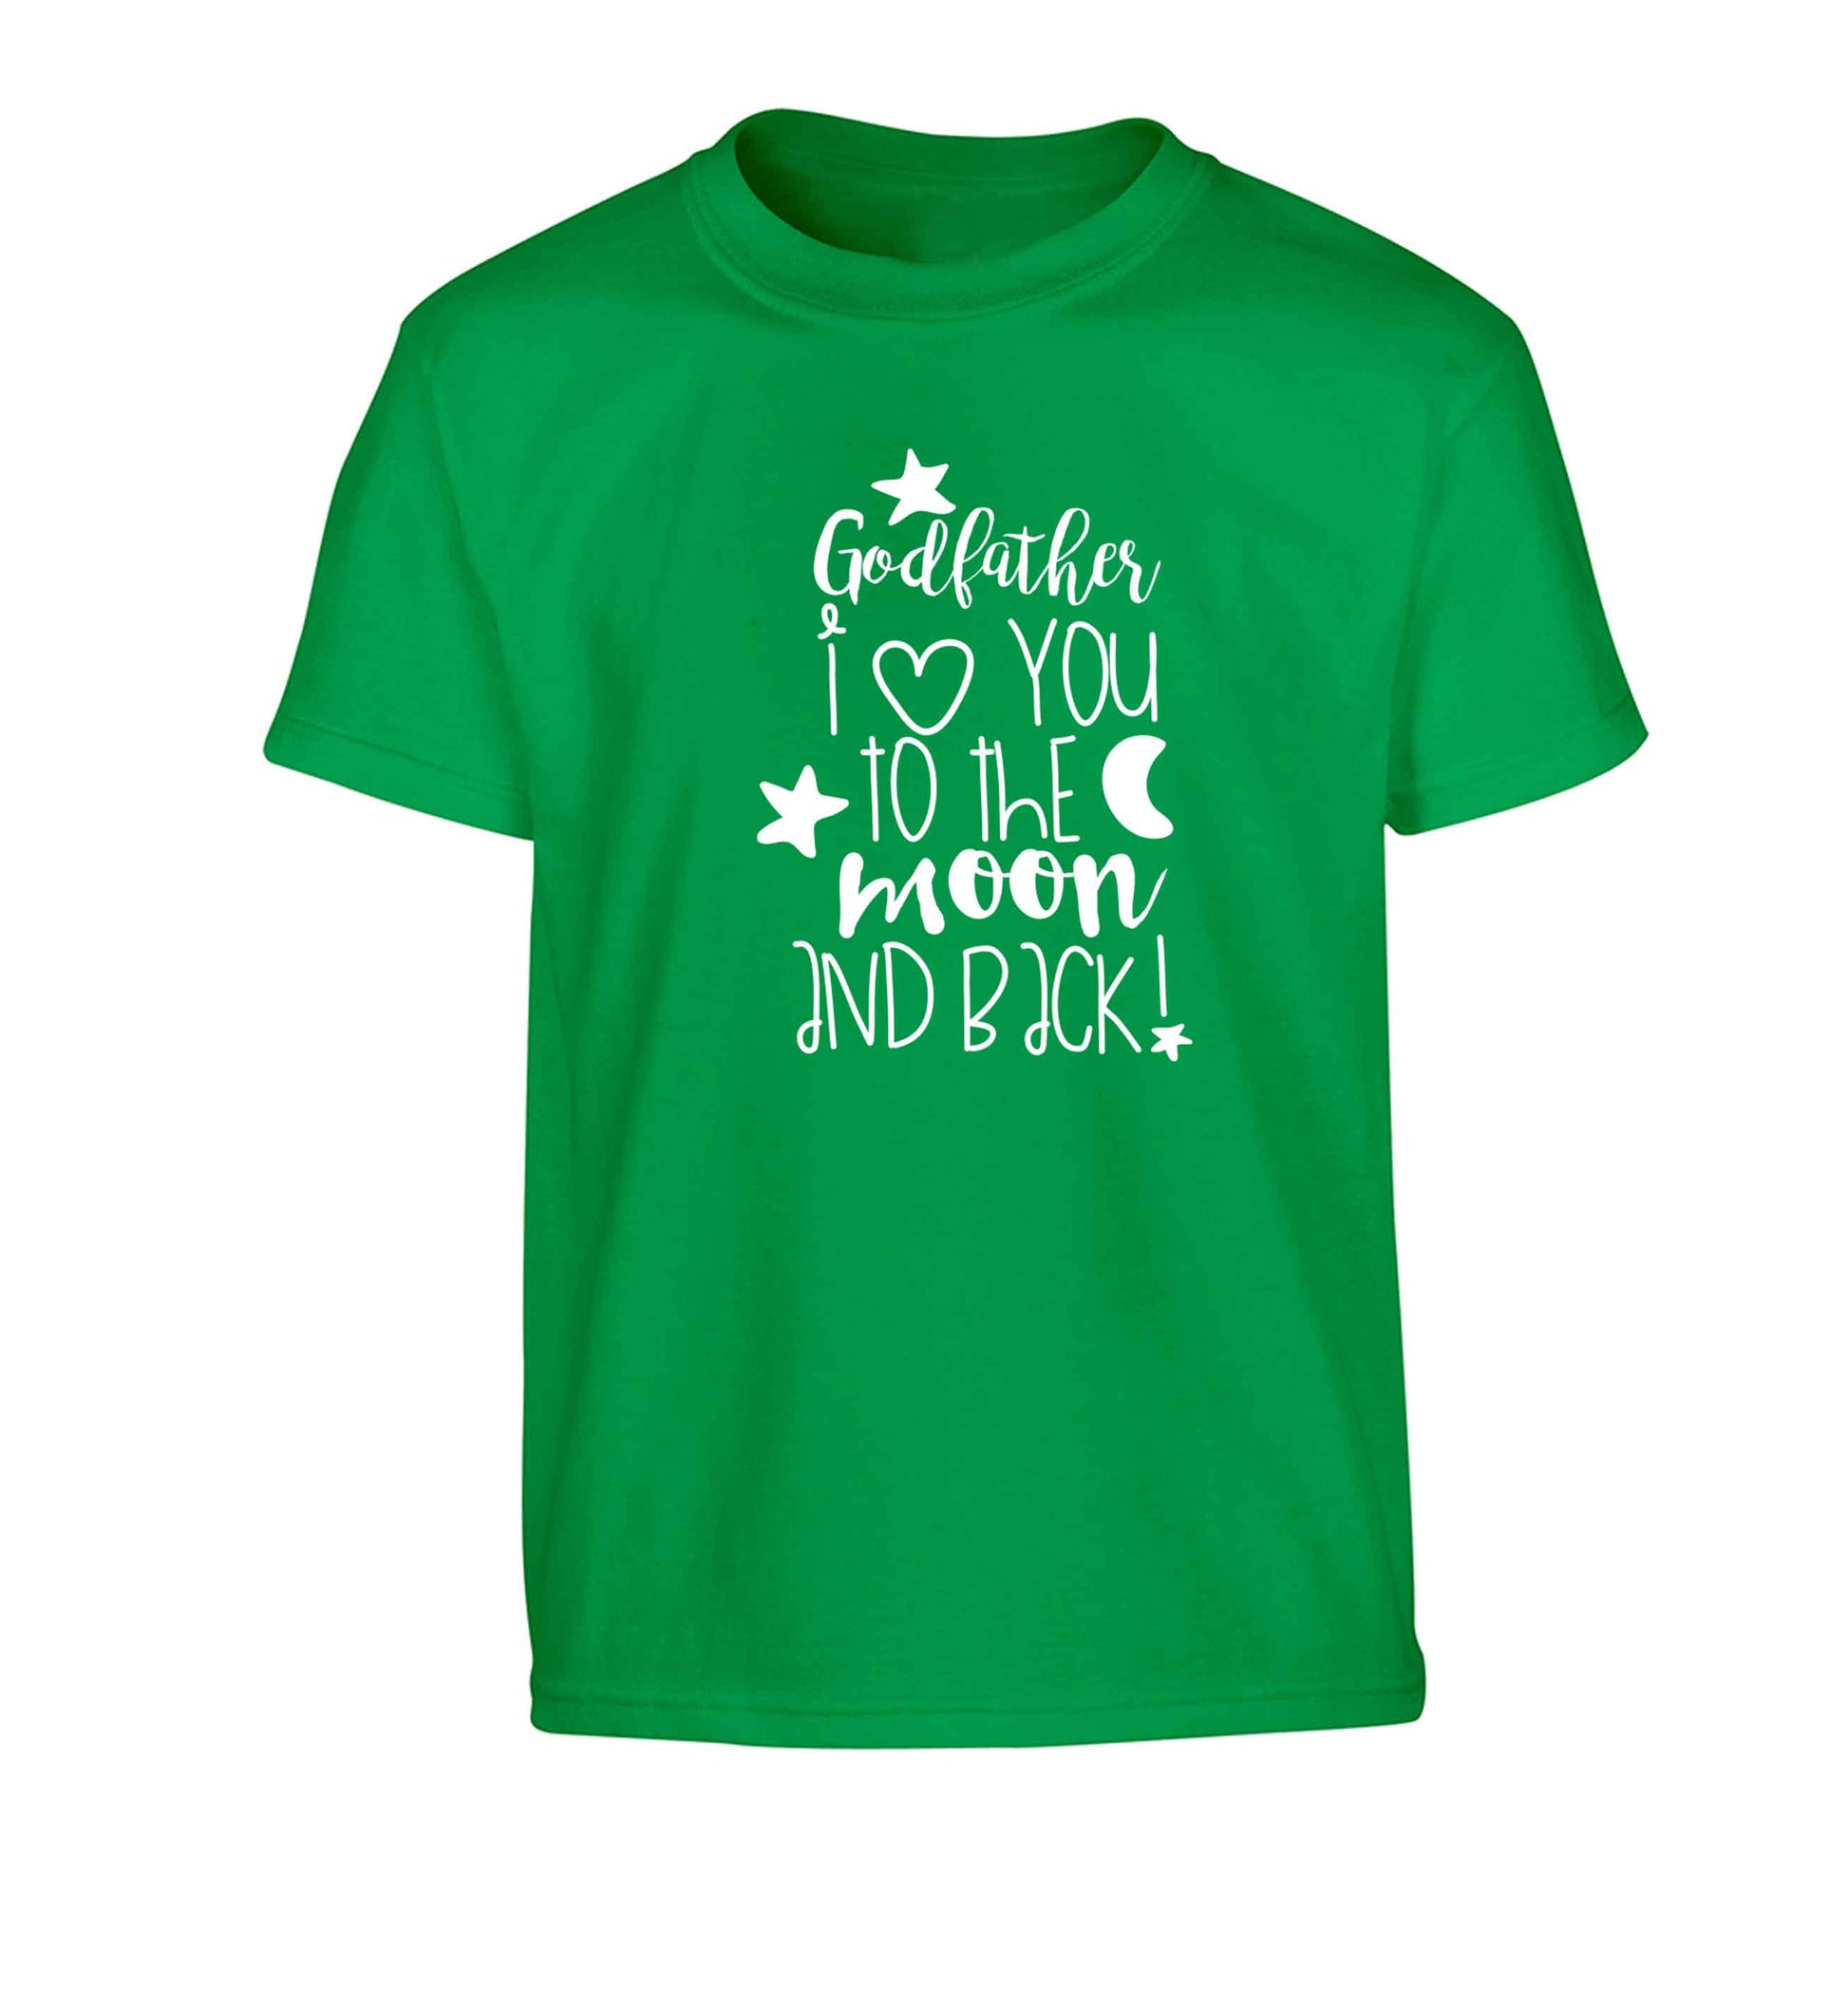 Godfather I love you to the moon and back Children's green Tshirt 12-13 Years